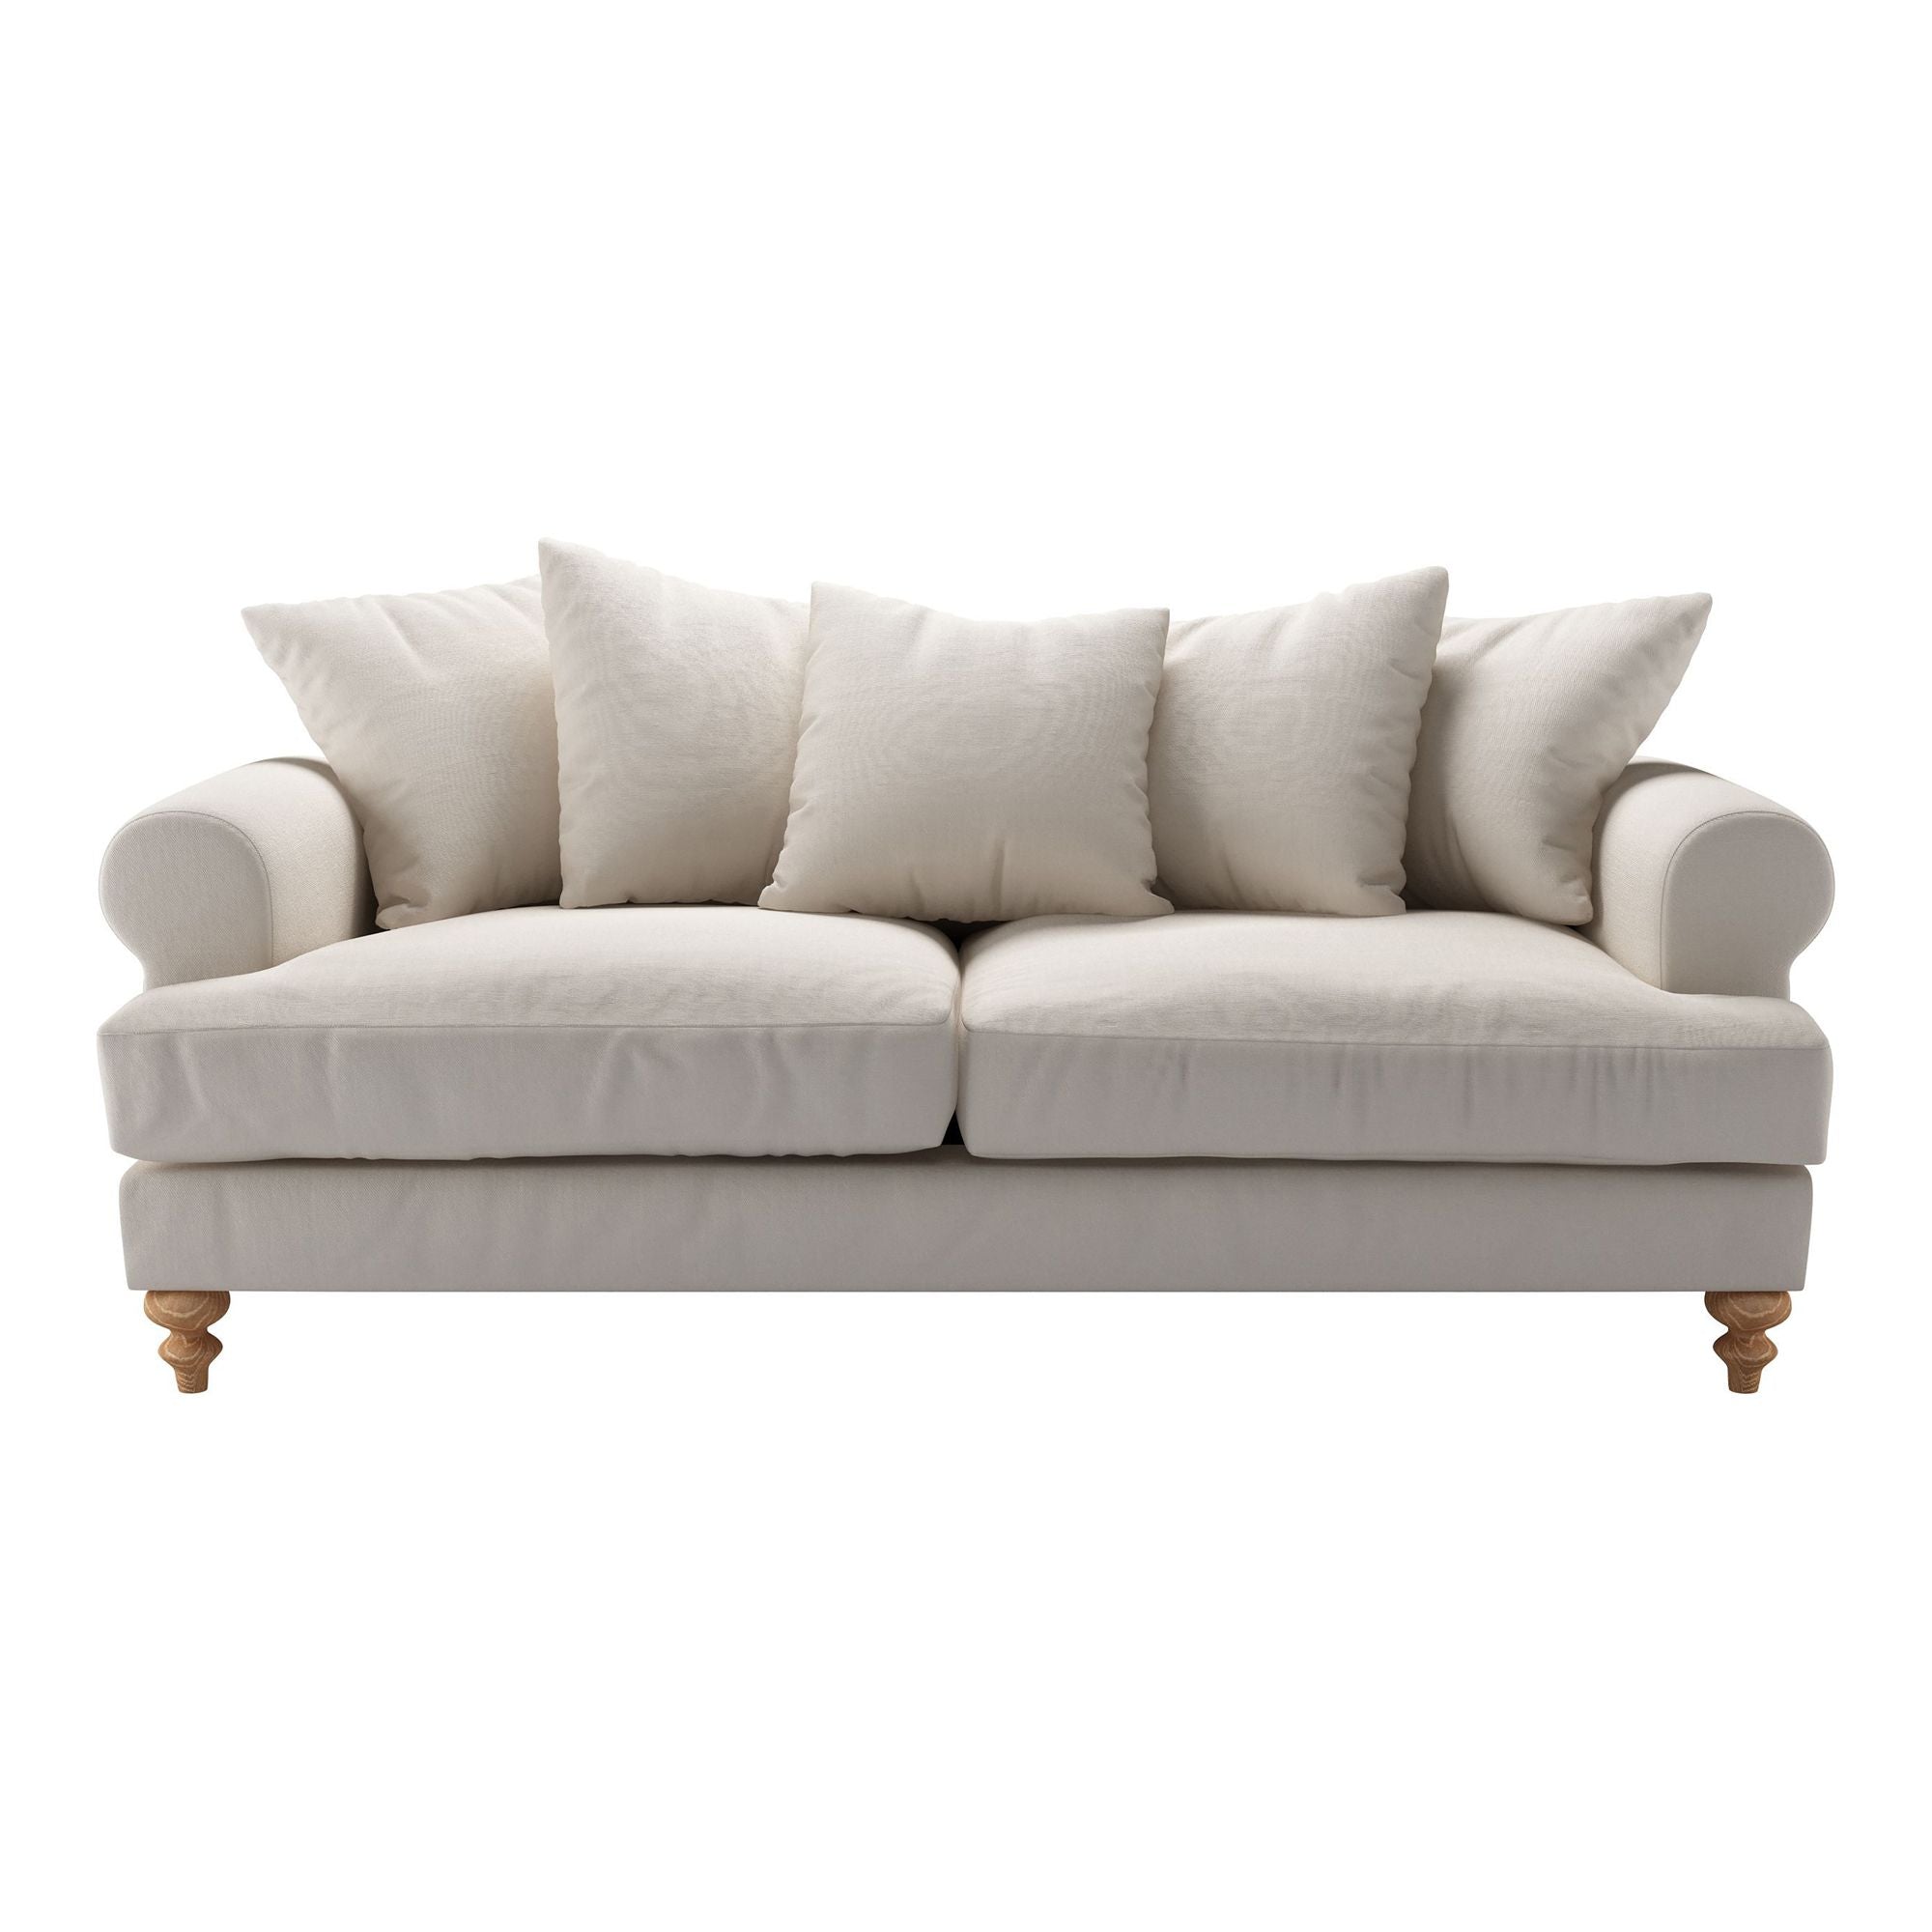 Teddy Brushed Linen Cotton Sofa - 3 Seater